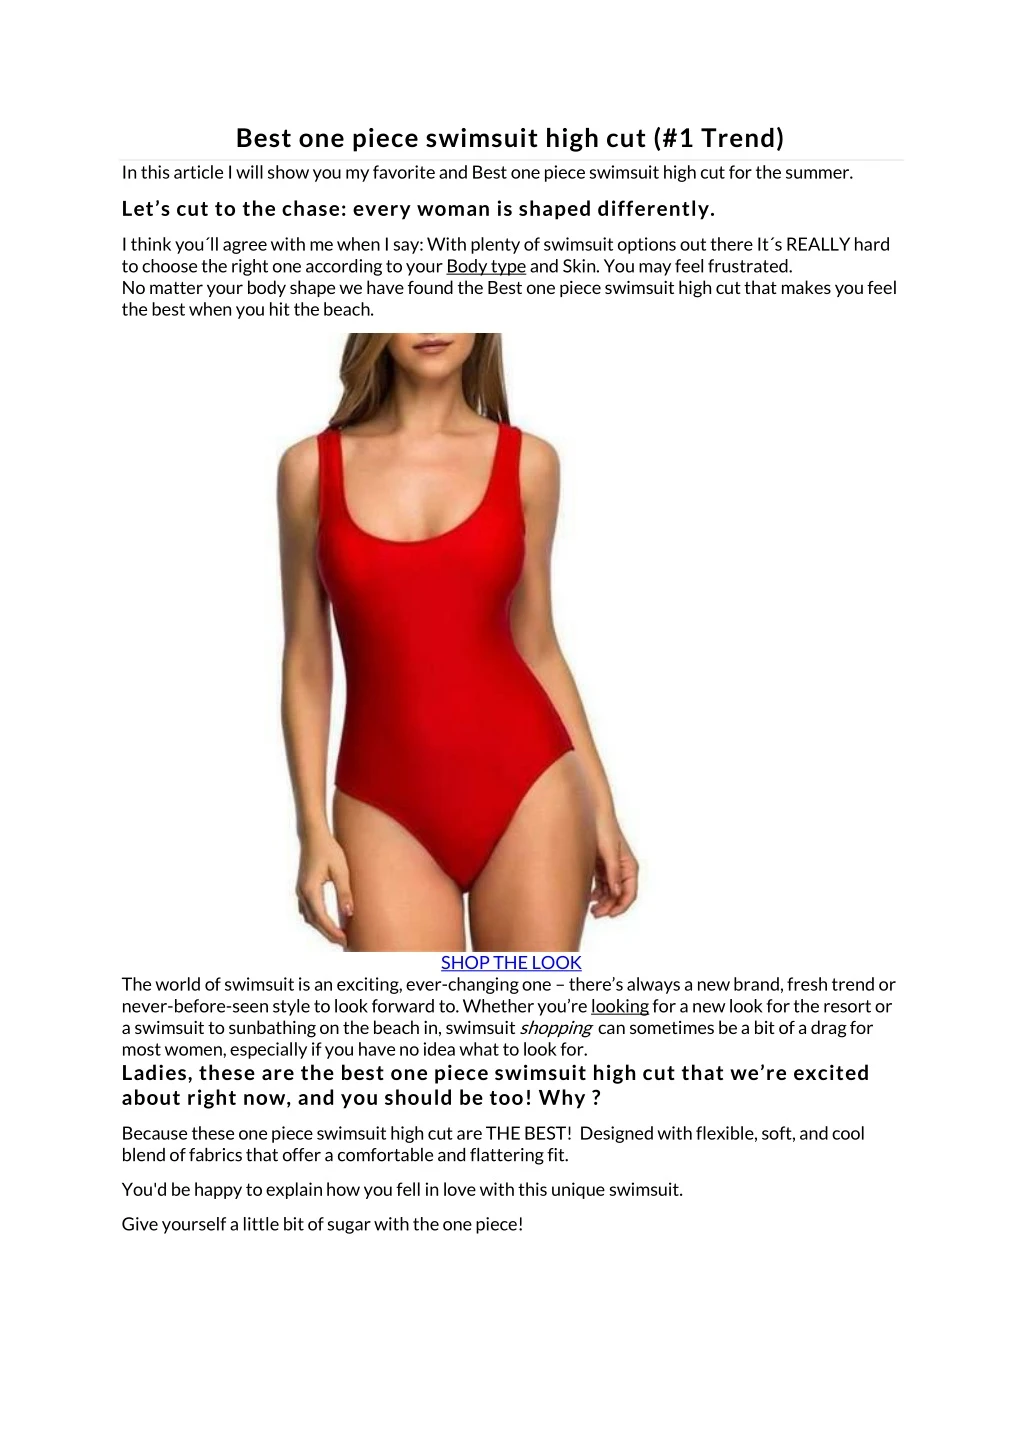 best one piece swimsuit high cut 1 trend in this